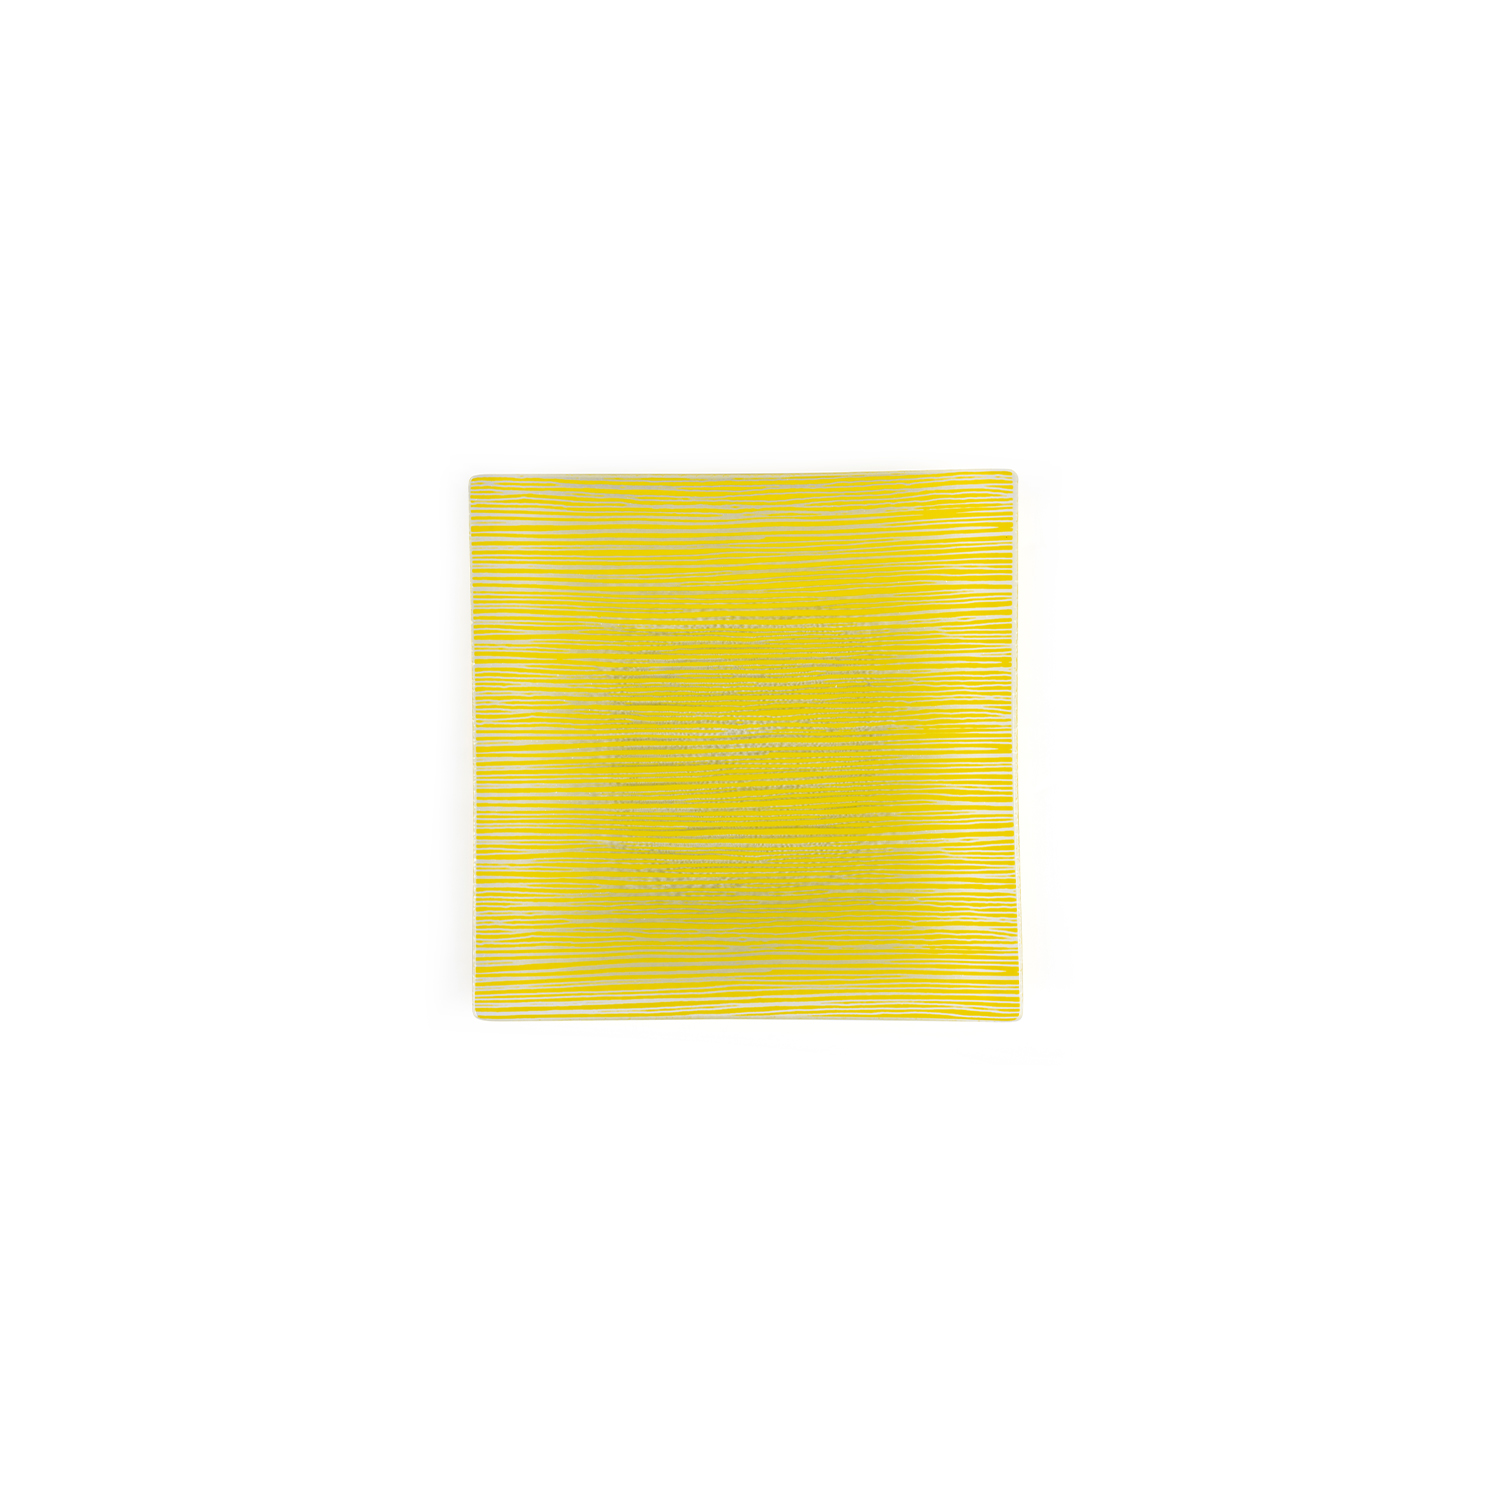 Fusion Glass Plate Yellow Square 7.75″ x 7.75″ x 0.5″  CasePack:12